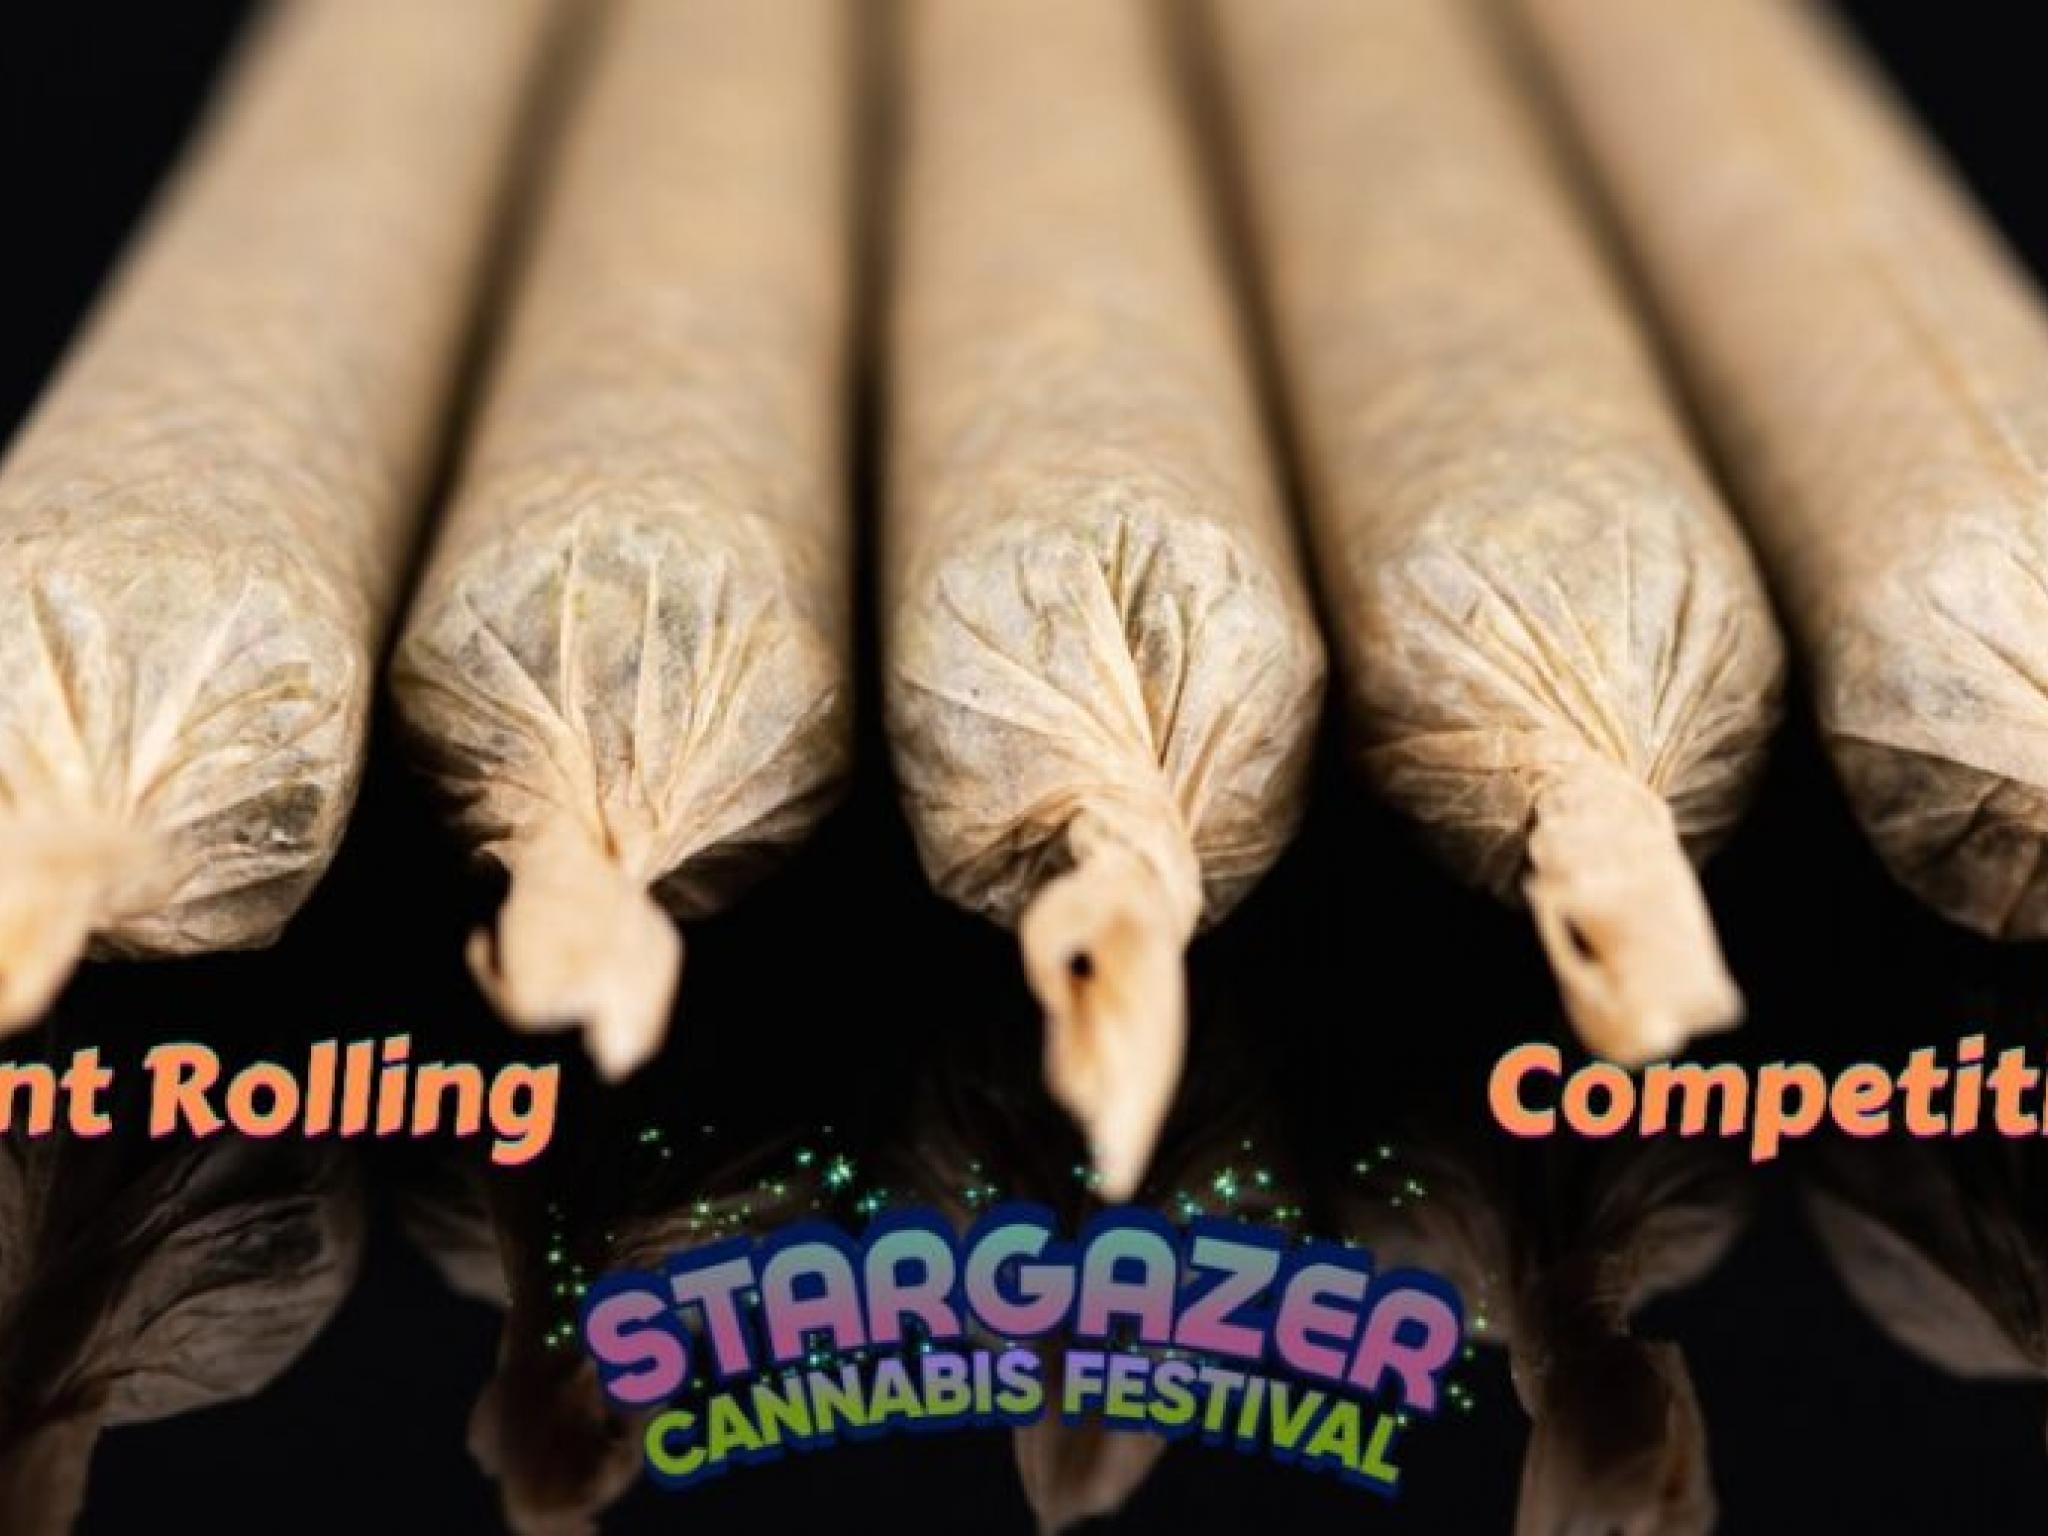  snoop-doggs-blunt-roller-will-be-judge-in-ohios-first-joint-rolling-contest-at-stargazer-cannabis-festival 